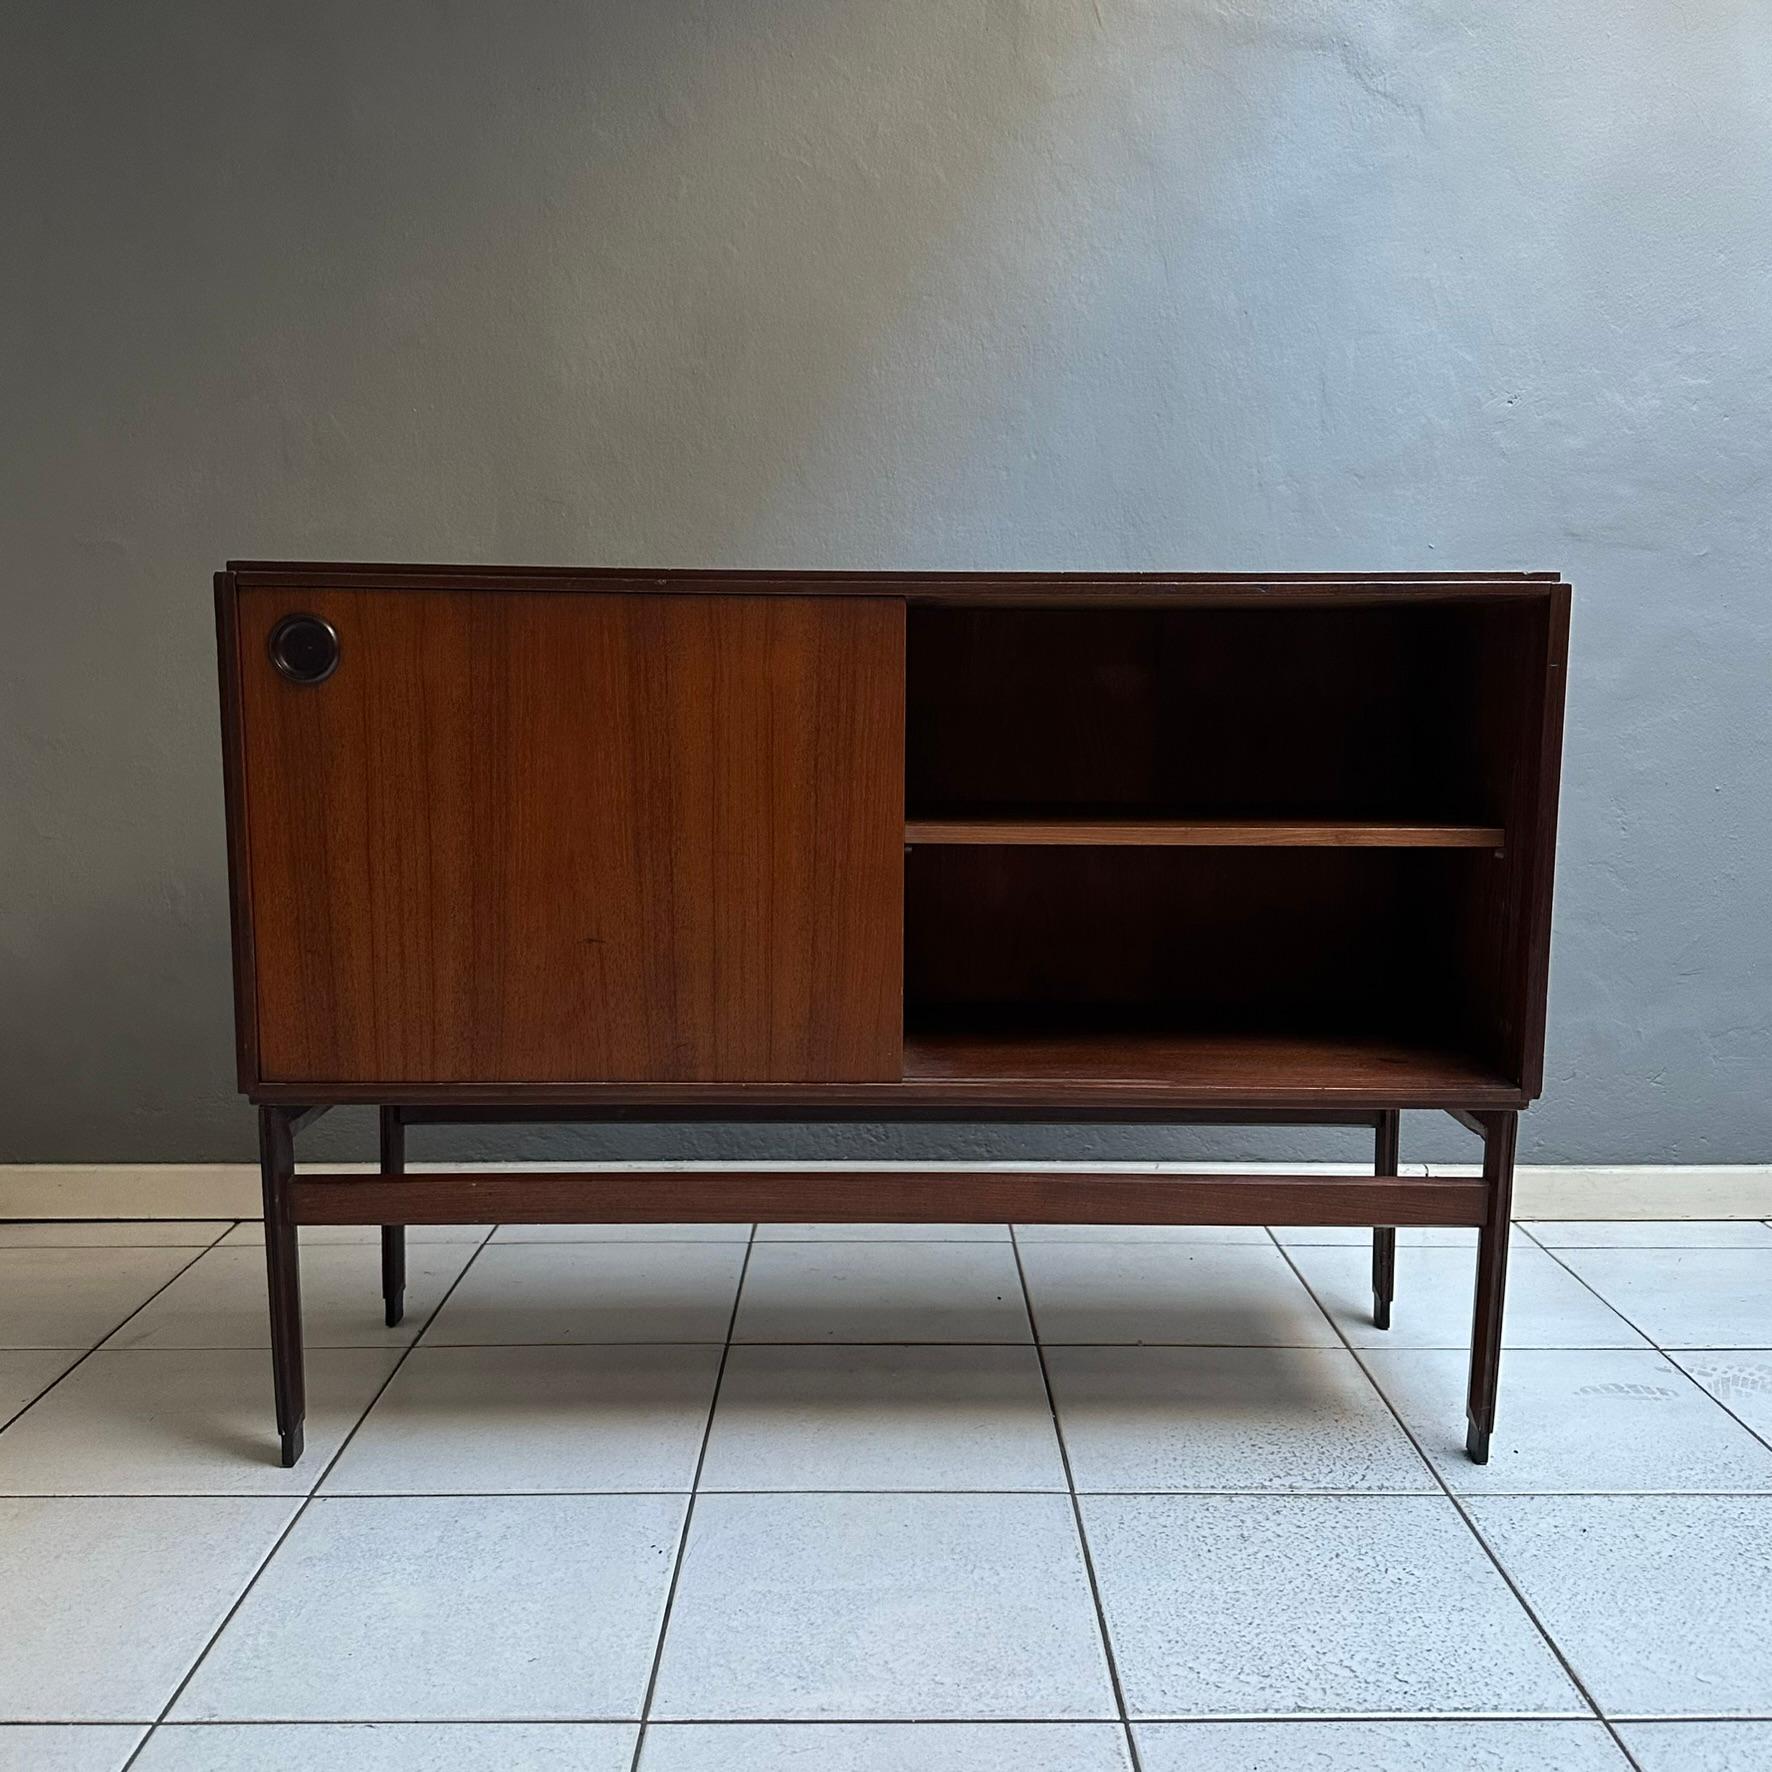 Teak Mid-Century Modern Small Sideboard from the 1960s, Italian manufacturing in teak For Sale